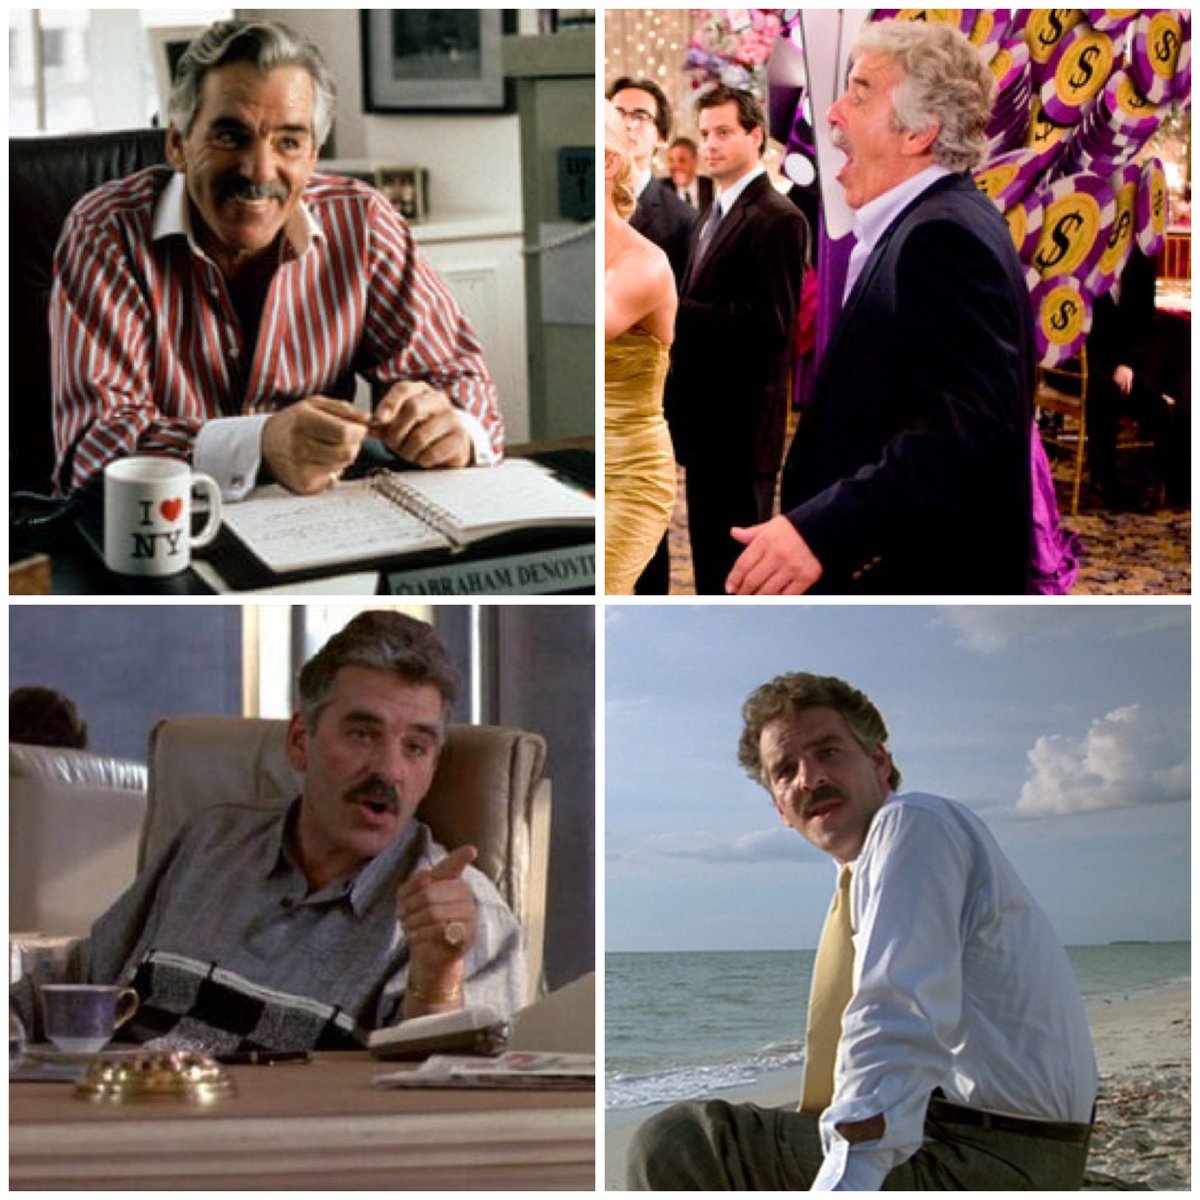 Happy birthday to Dennis Farina 🎂 

The actor would have turned 80 today.

#DennisFarina